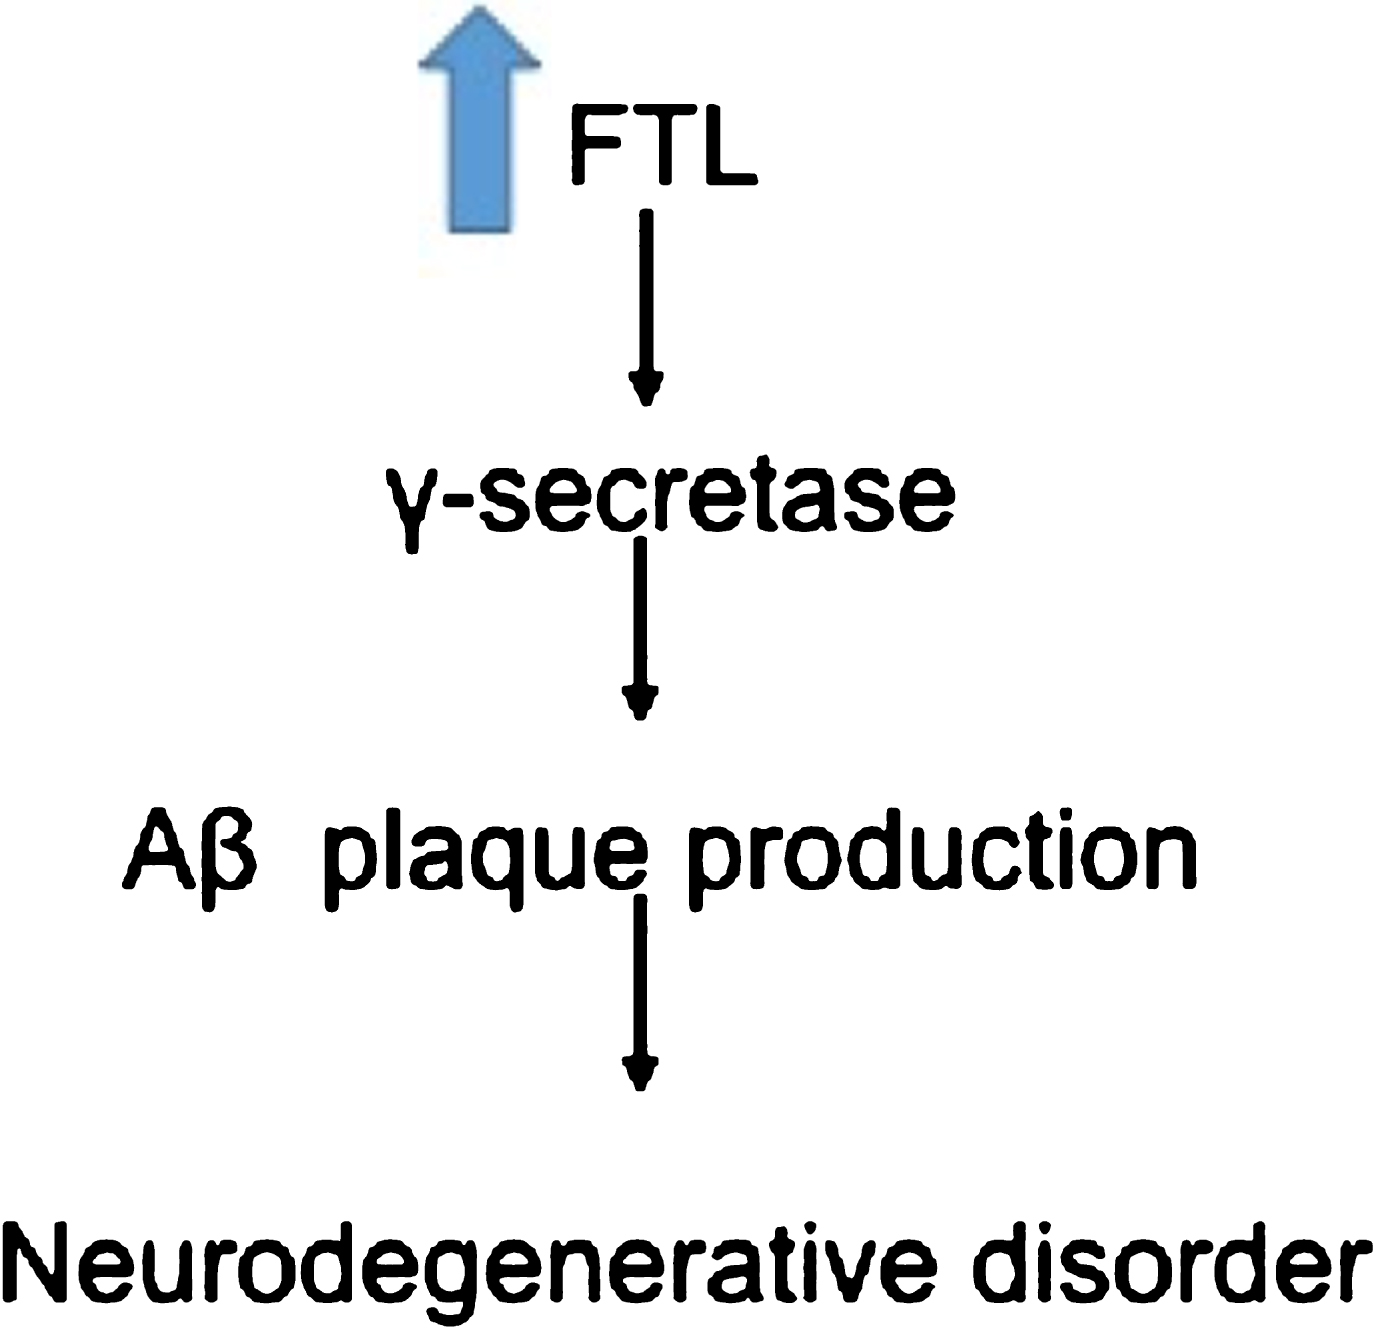 Overexpression of FTL causes increase production of Aβ plaques leading to neurodegeneration [66].